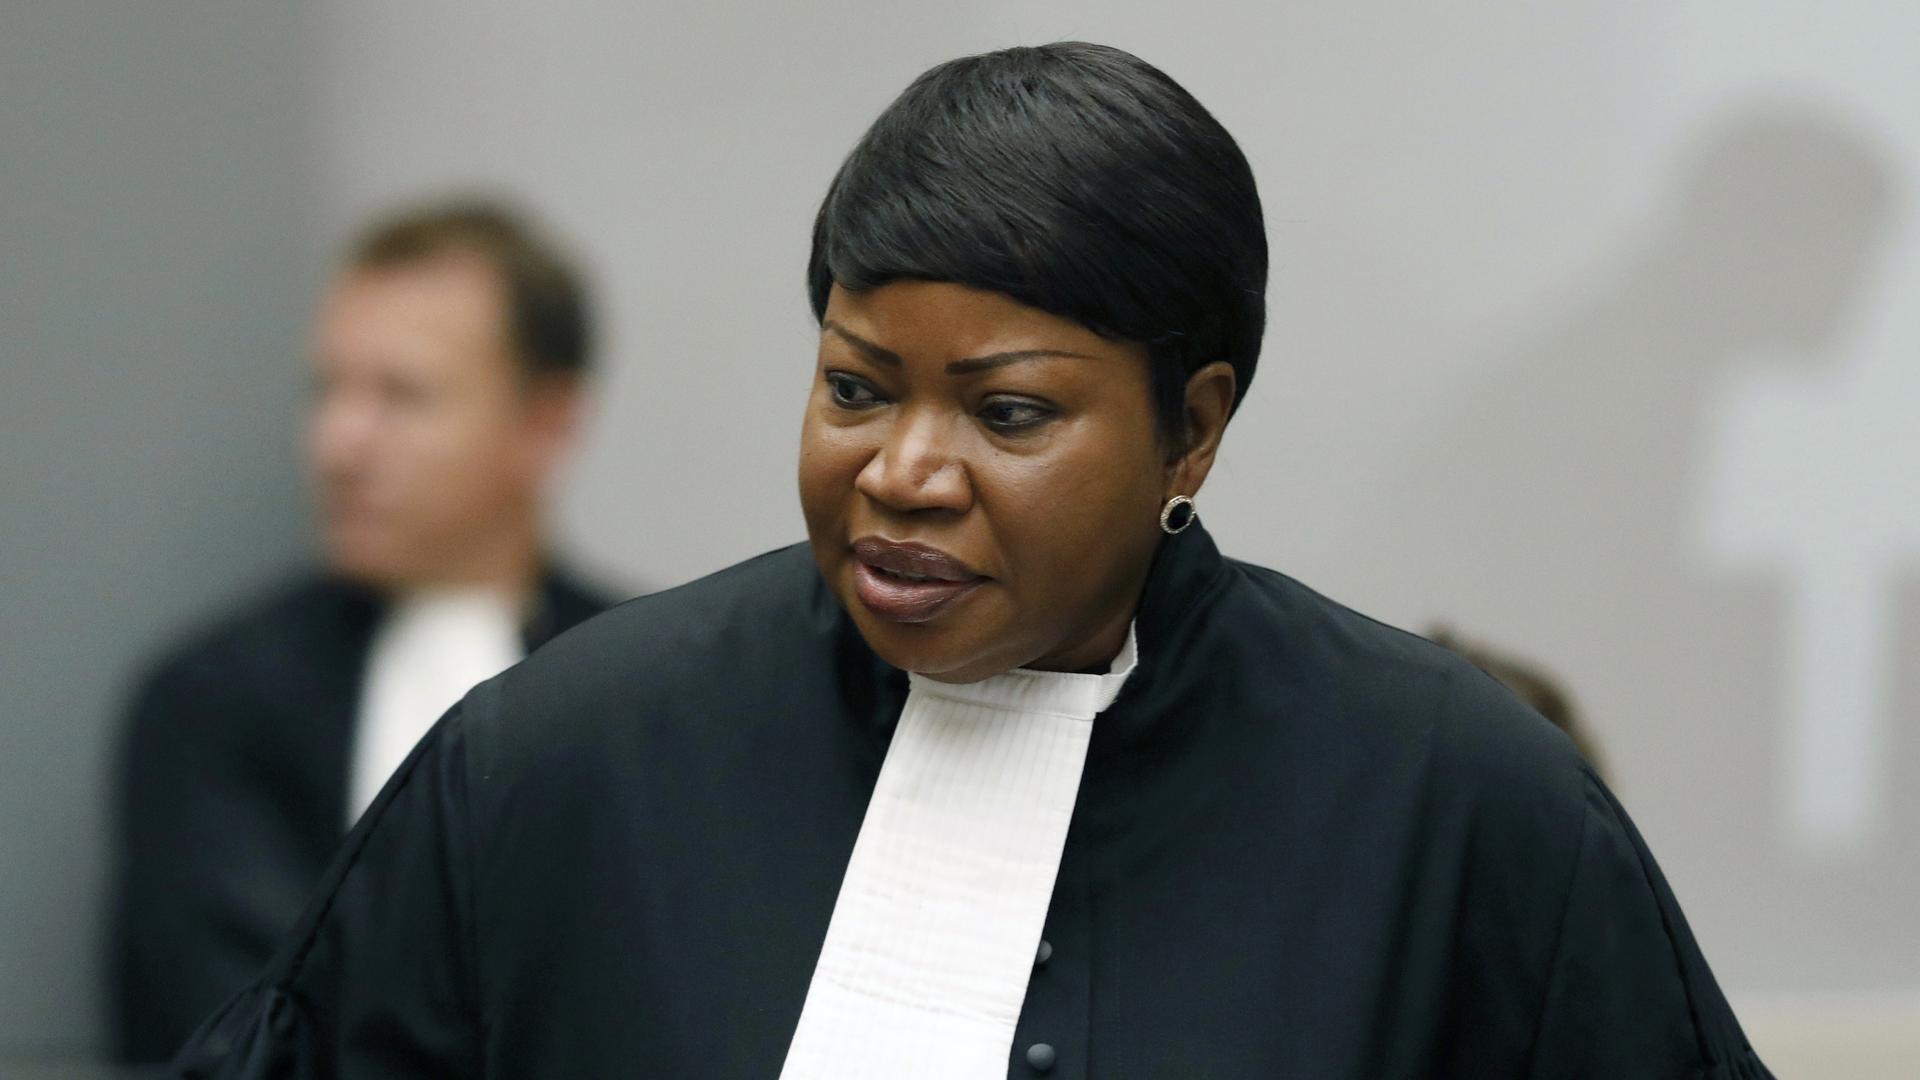 Prosecutor Fatou Bensouda speaks at the International Criminal Court (ICC) in The Hague, Netherlands, in this this Aug. 28, 2018, file photo.